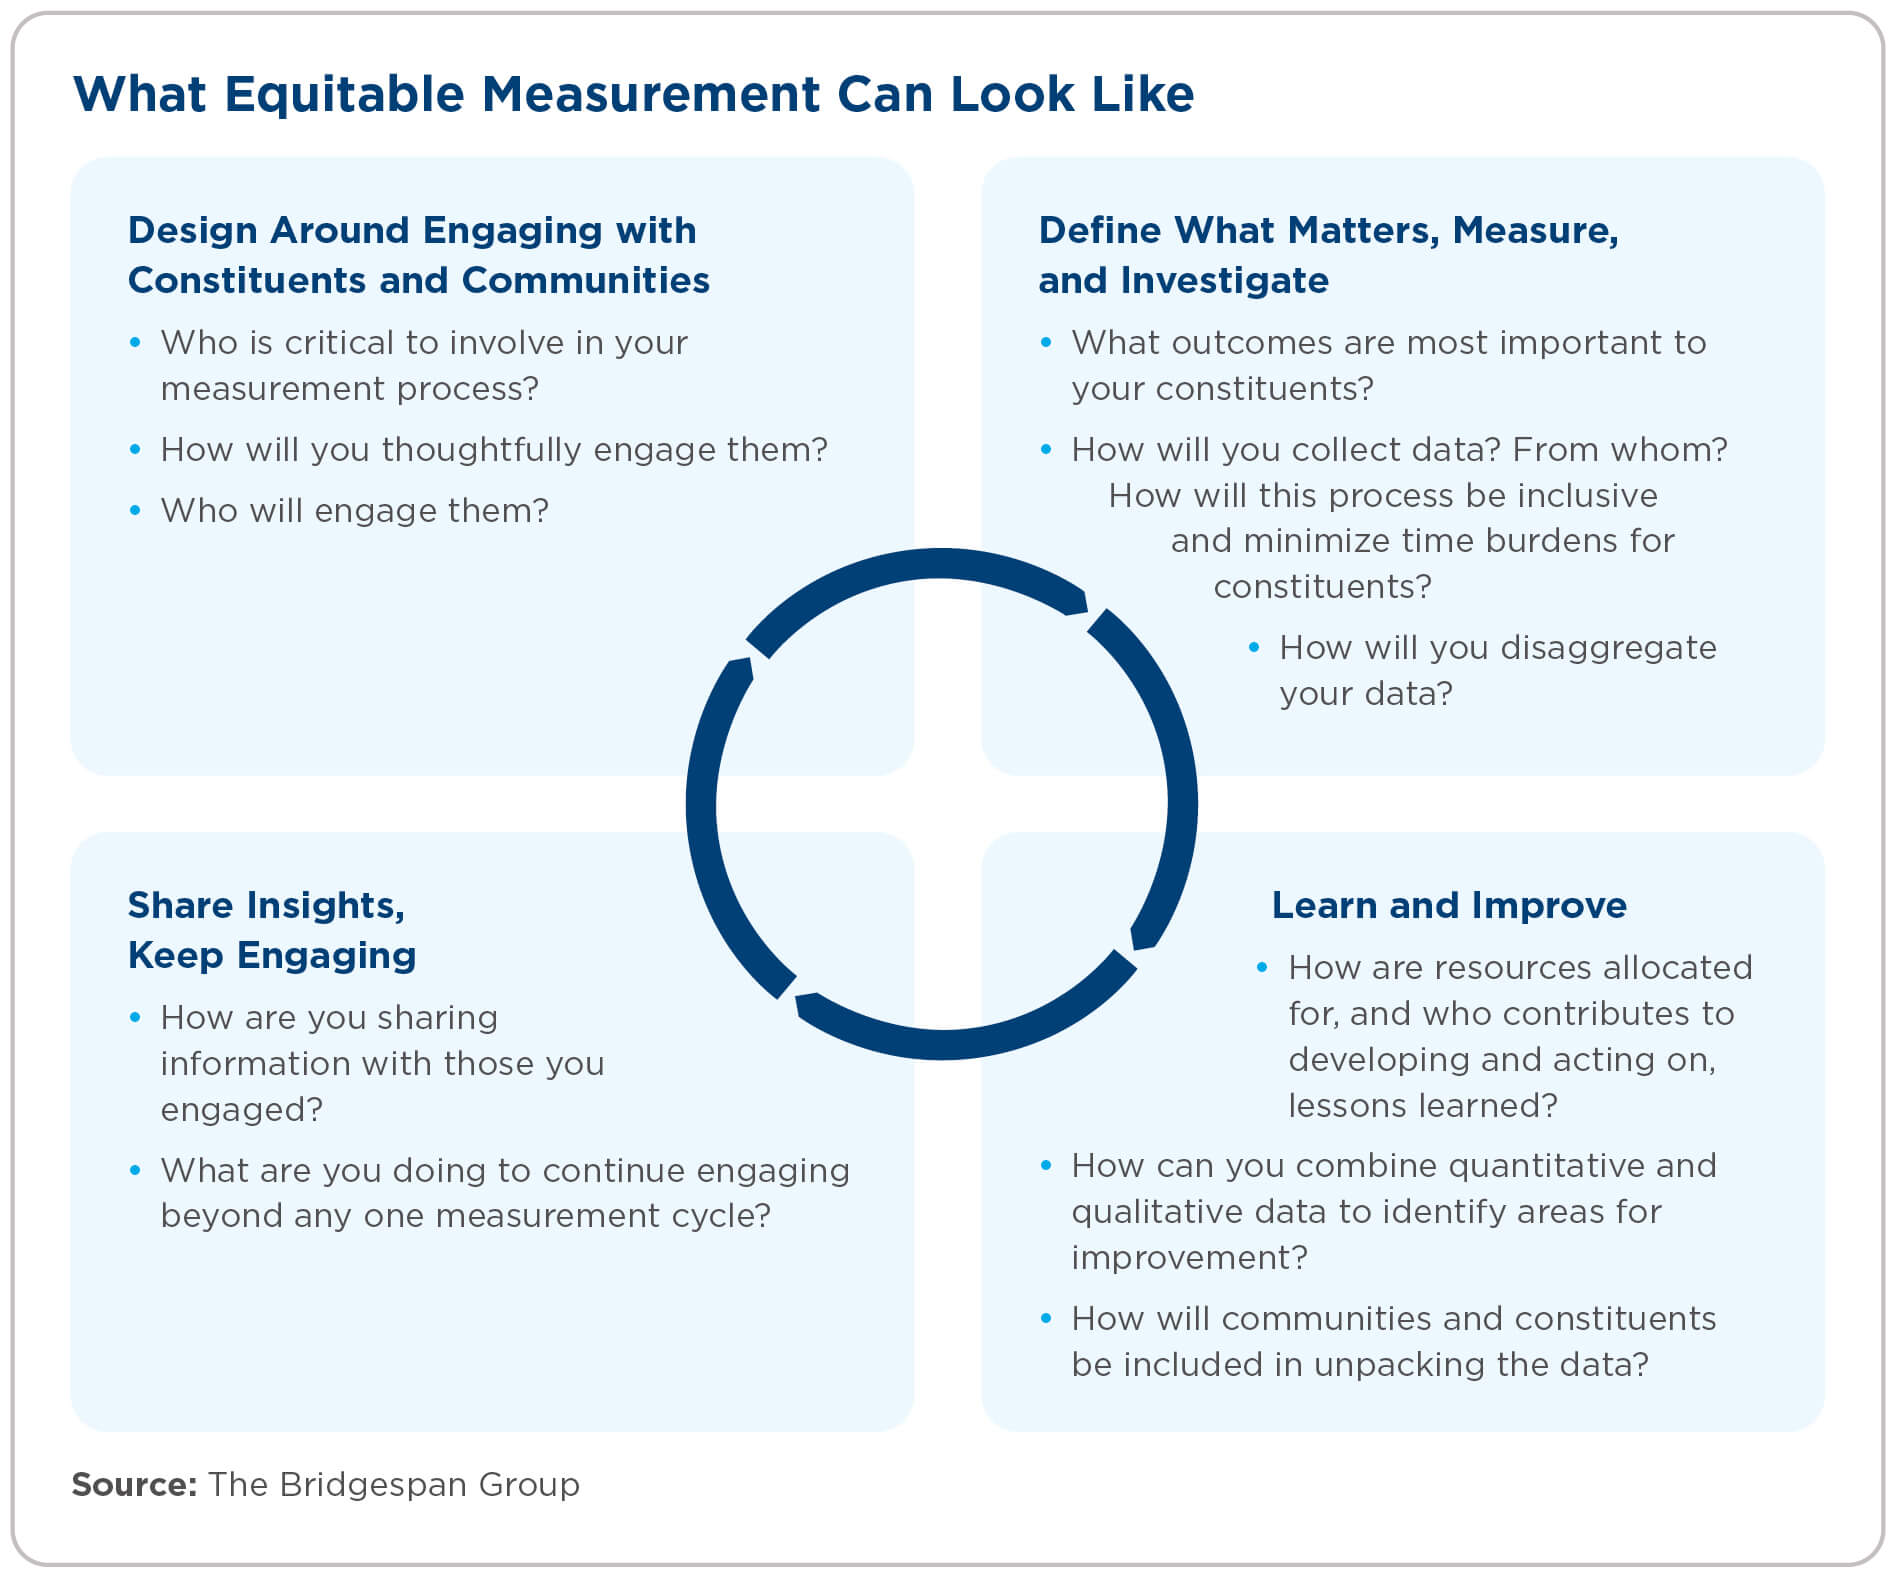 Chart illustrating four approaches to equitable measurement